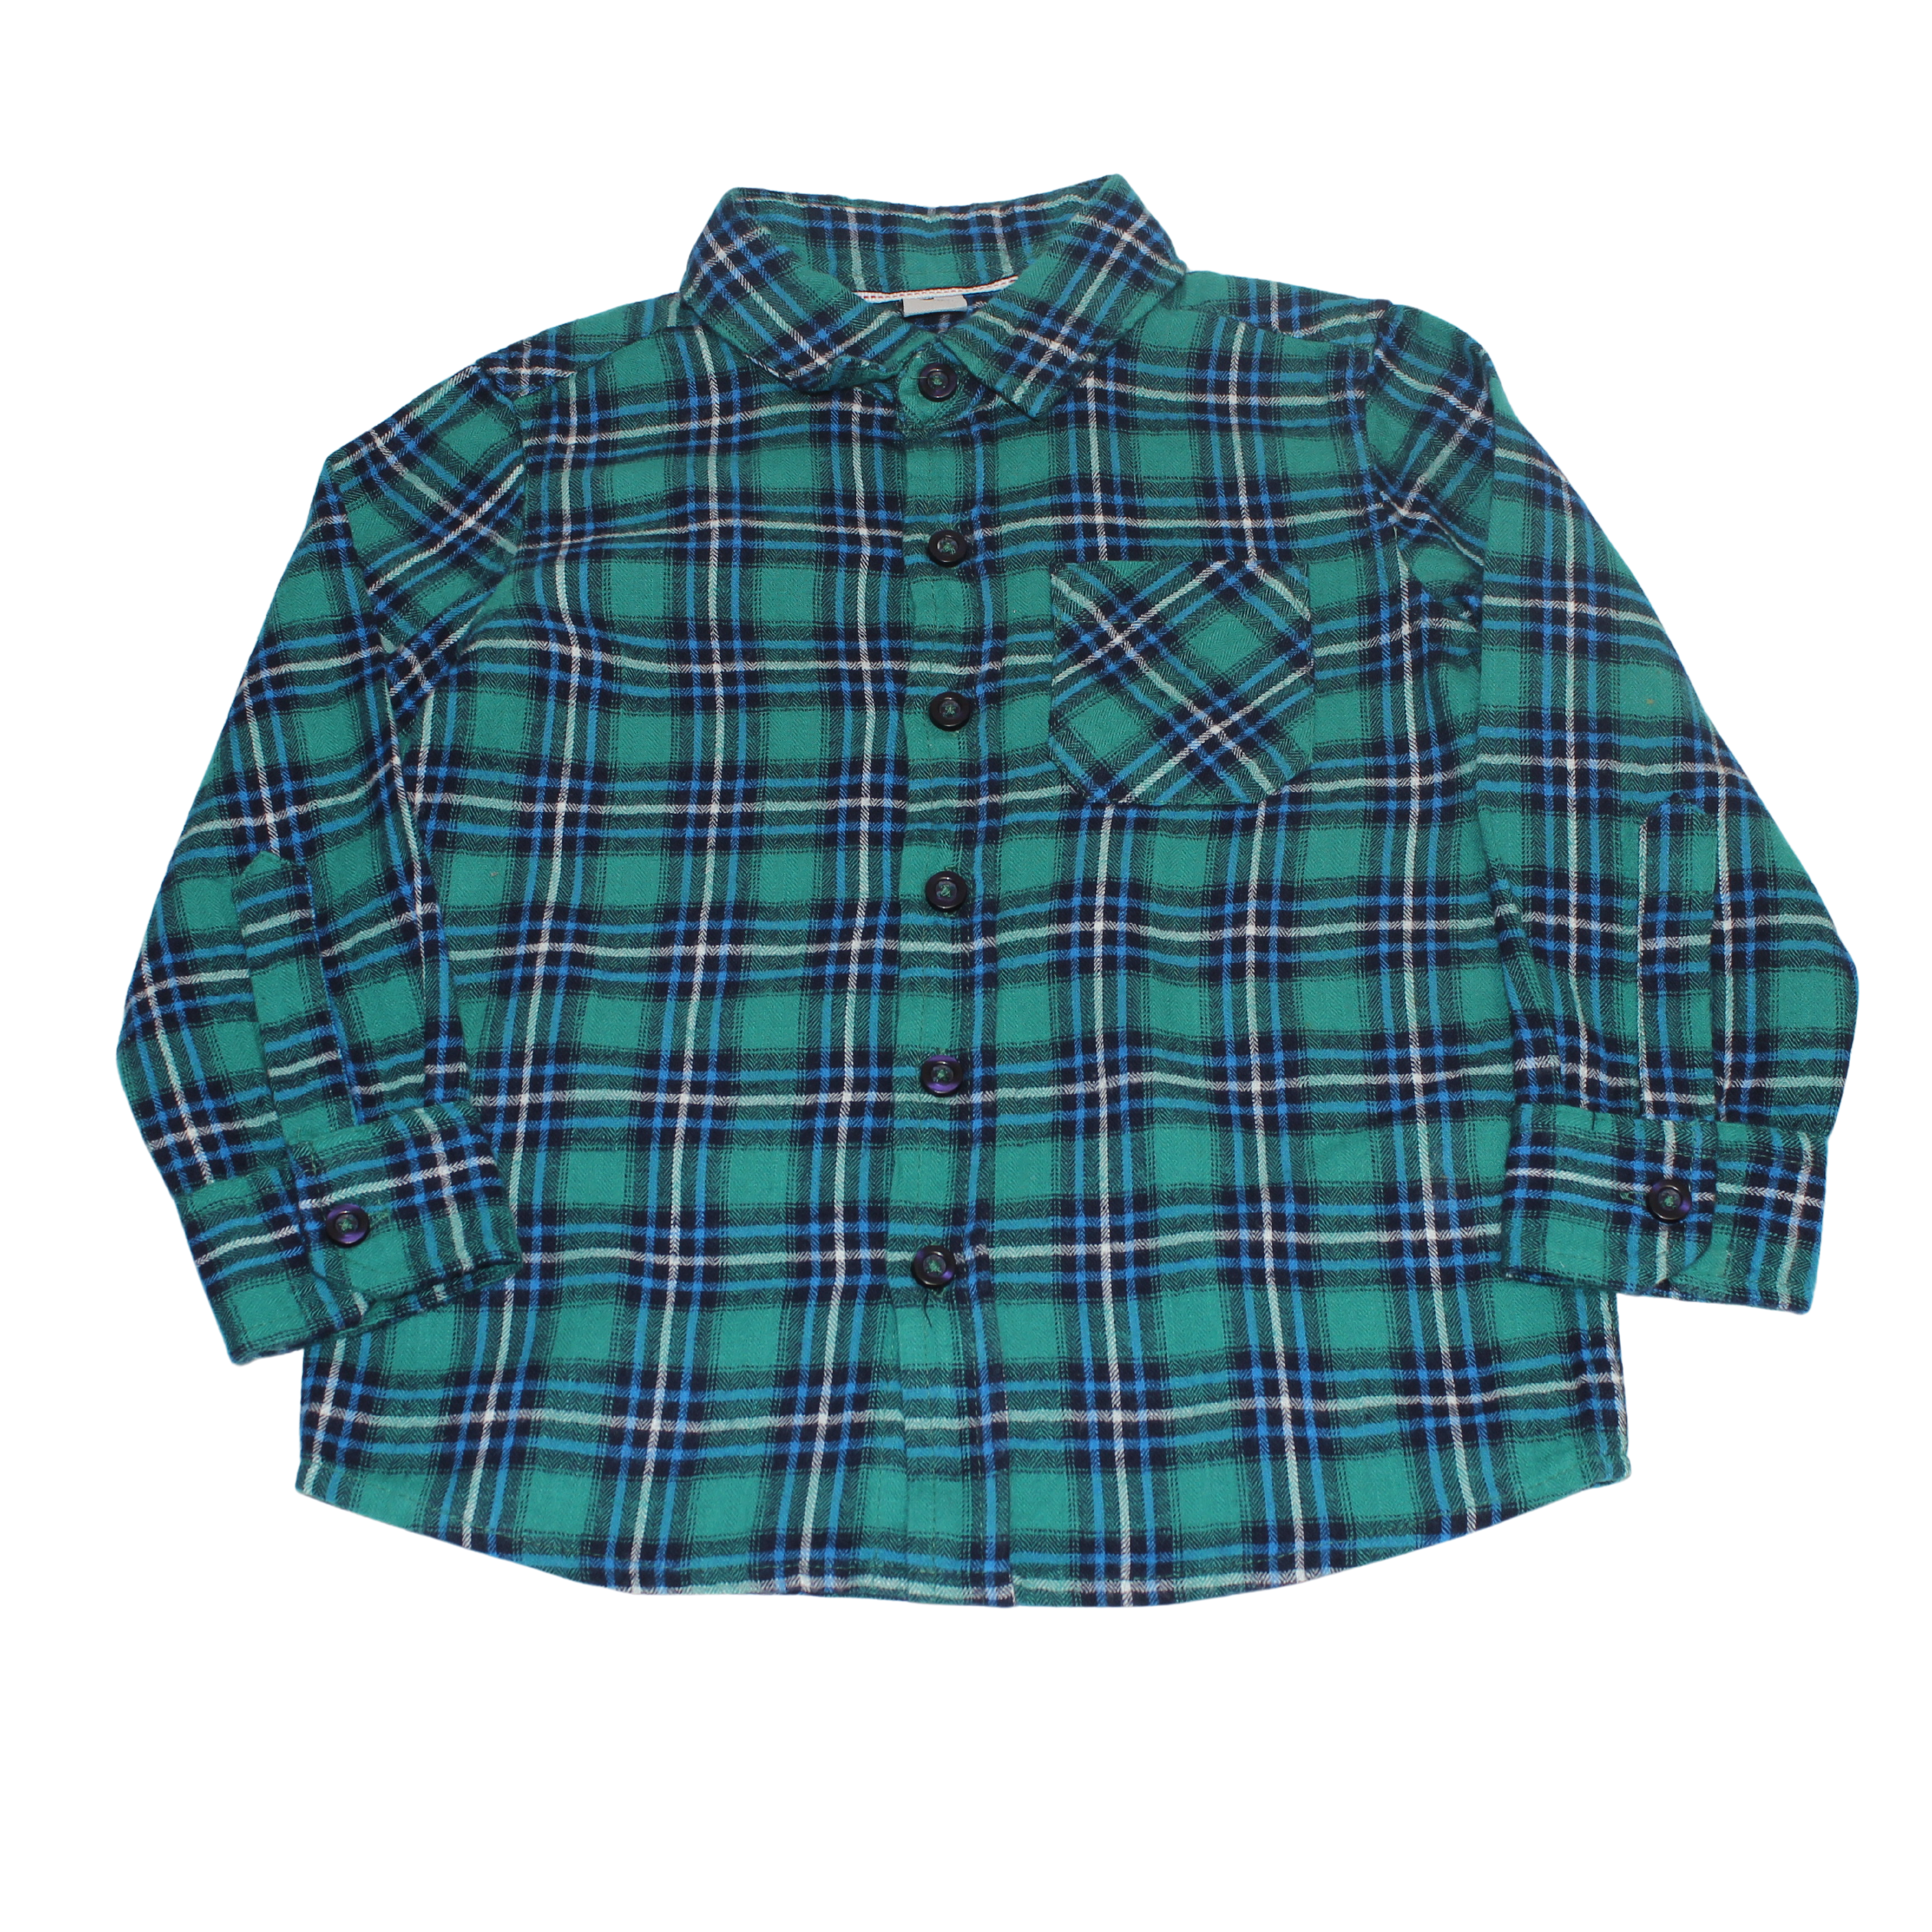 Checked Brushed Cotton Shirt